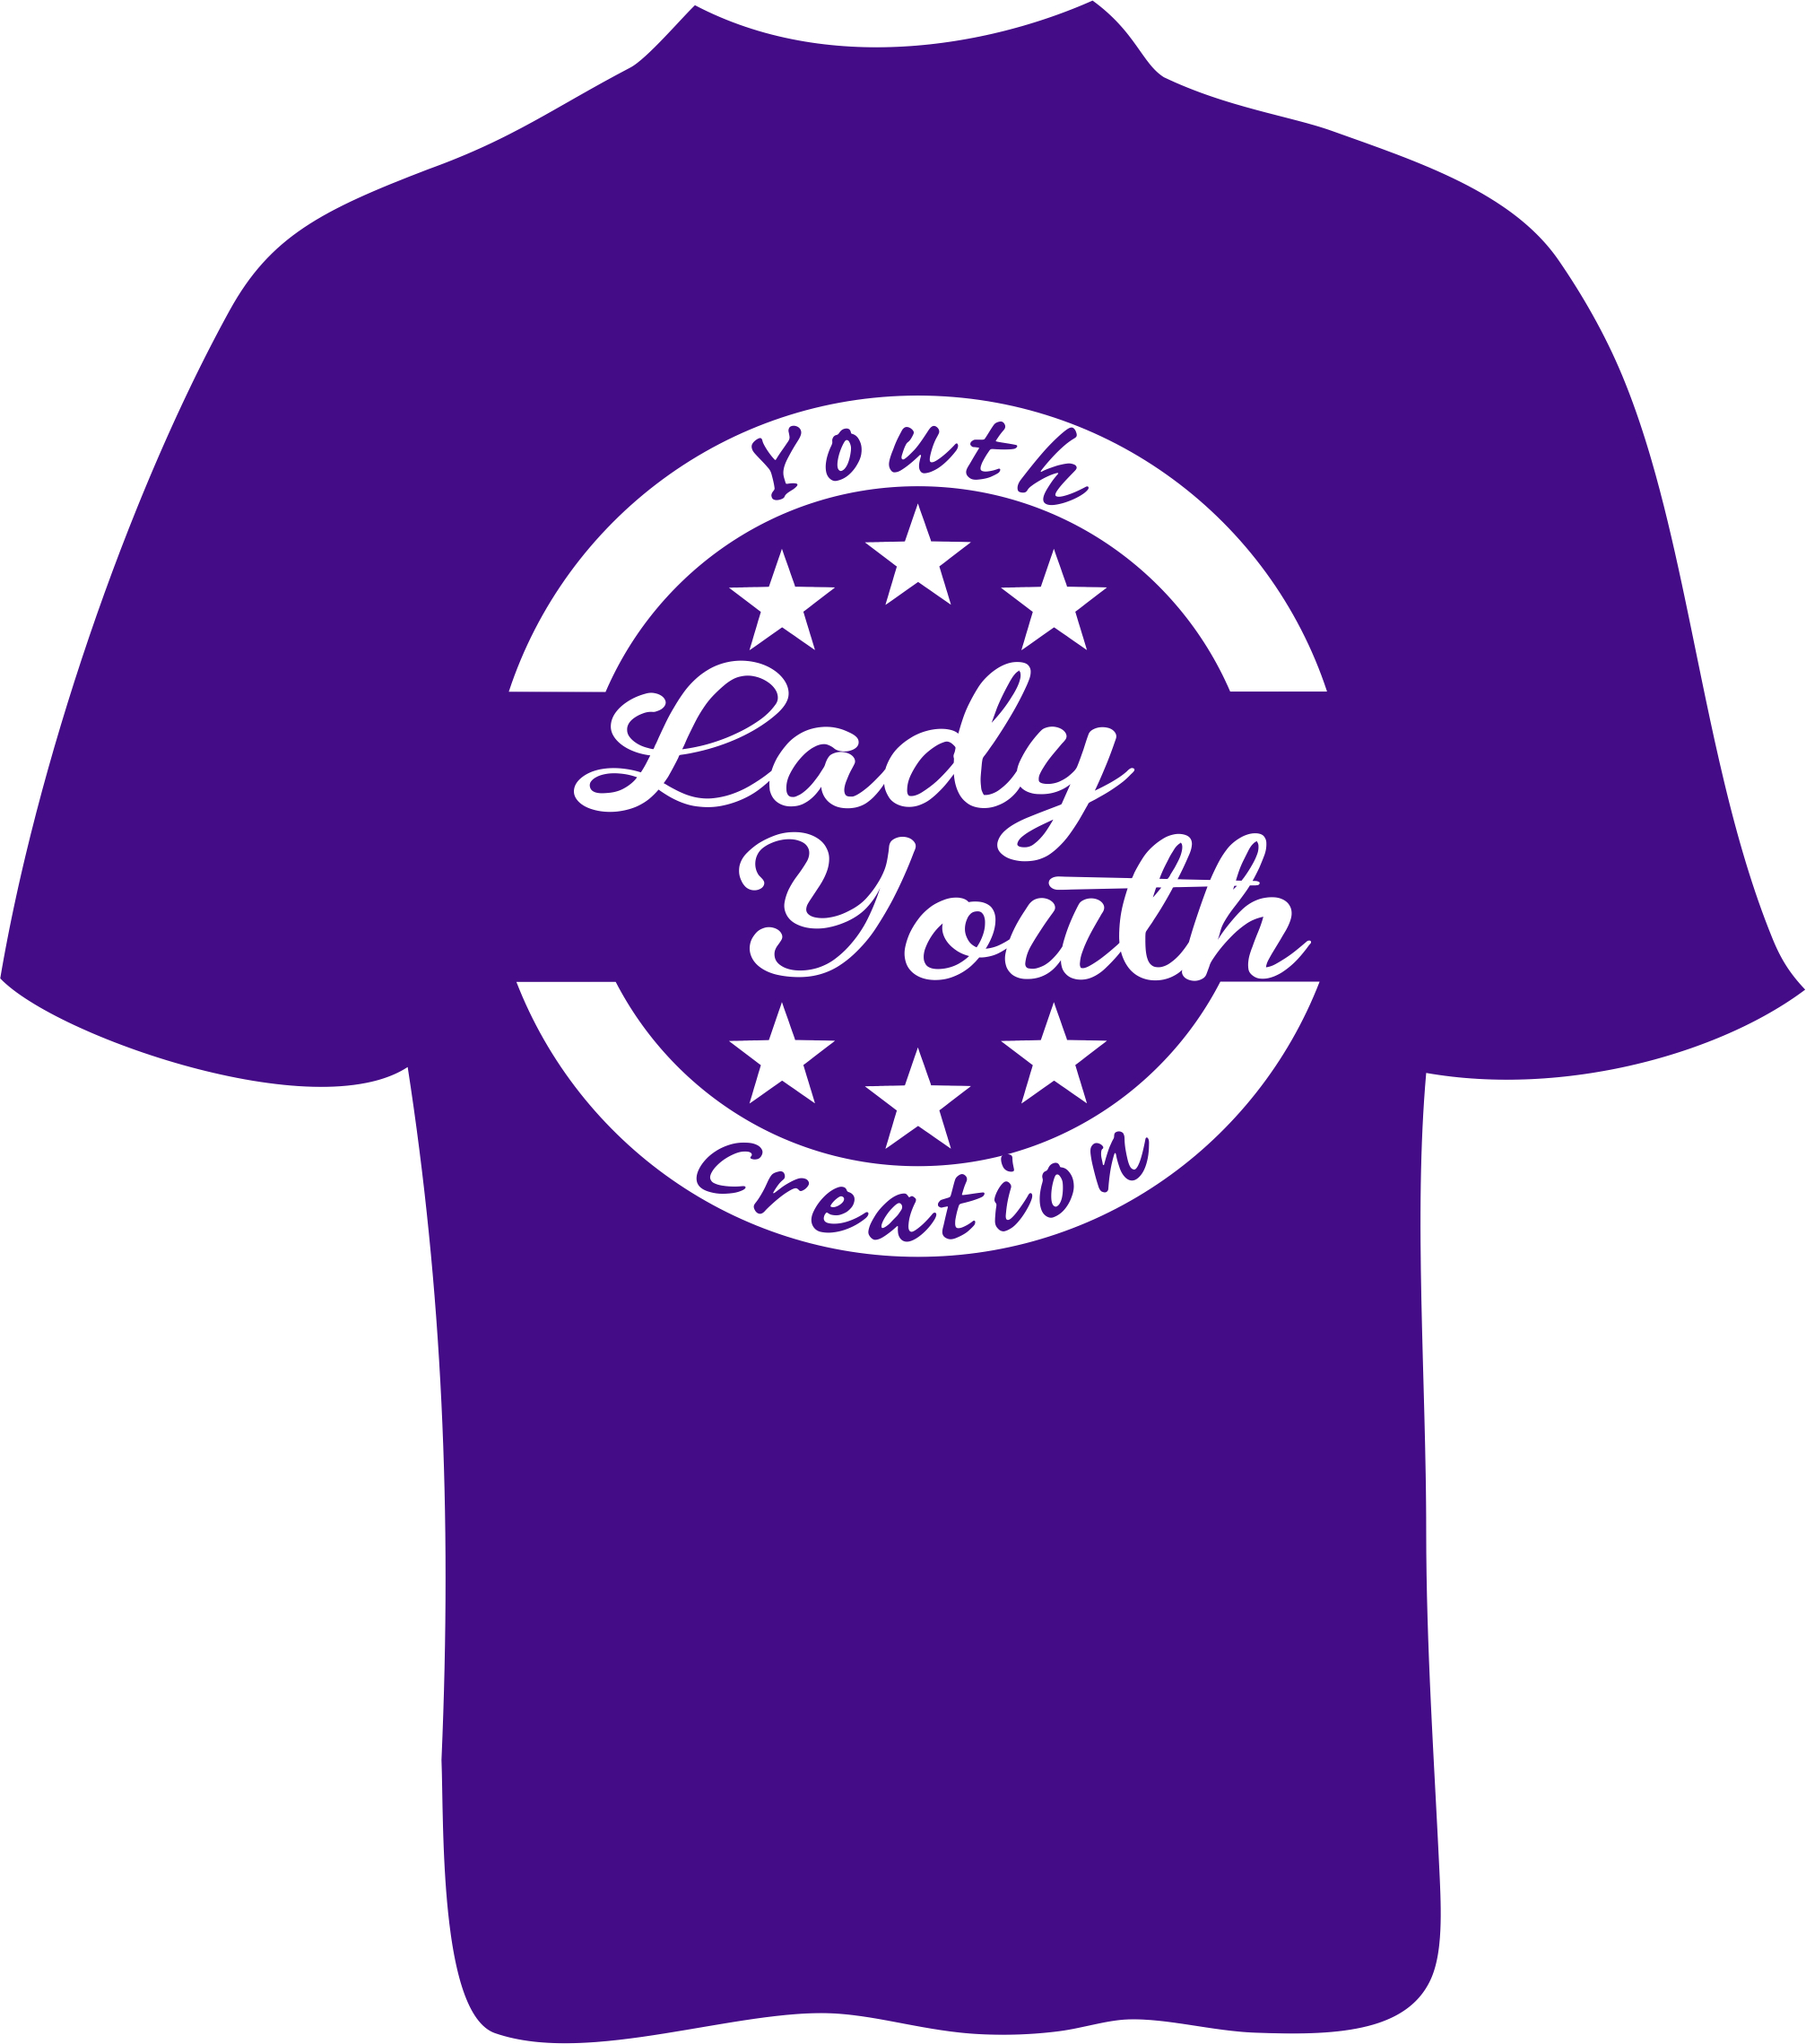 Youth Creation Adult Competition Team Tee Shirt